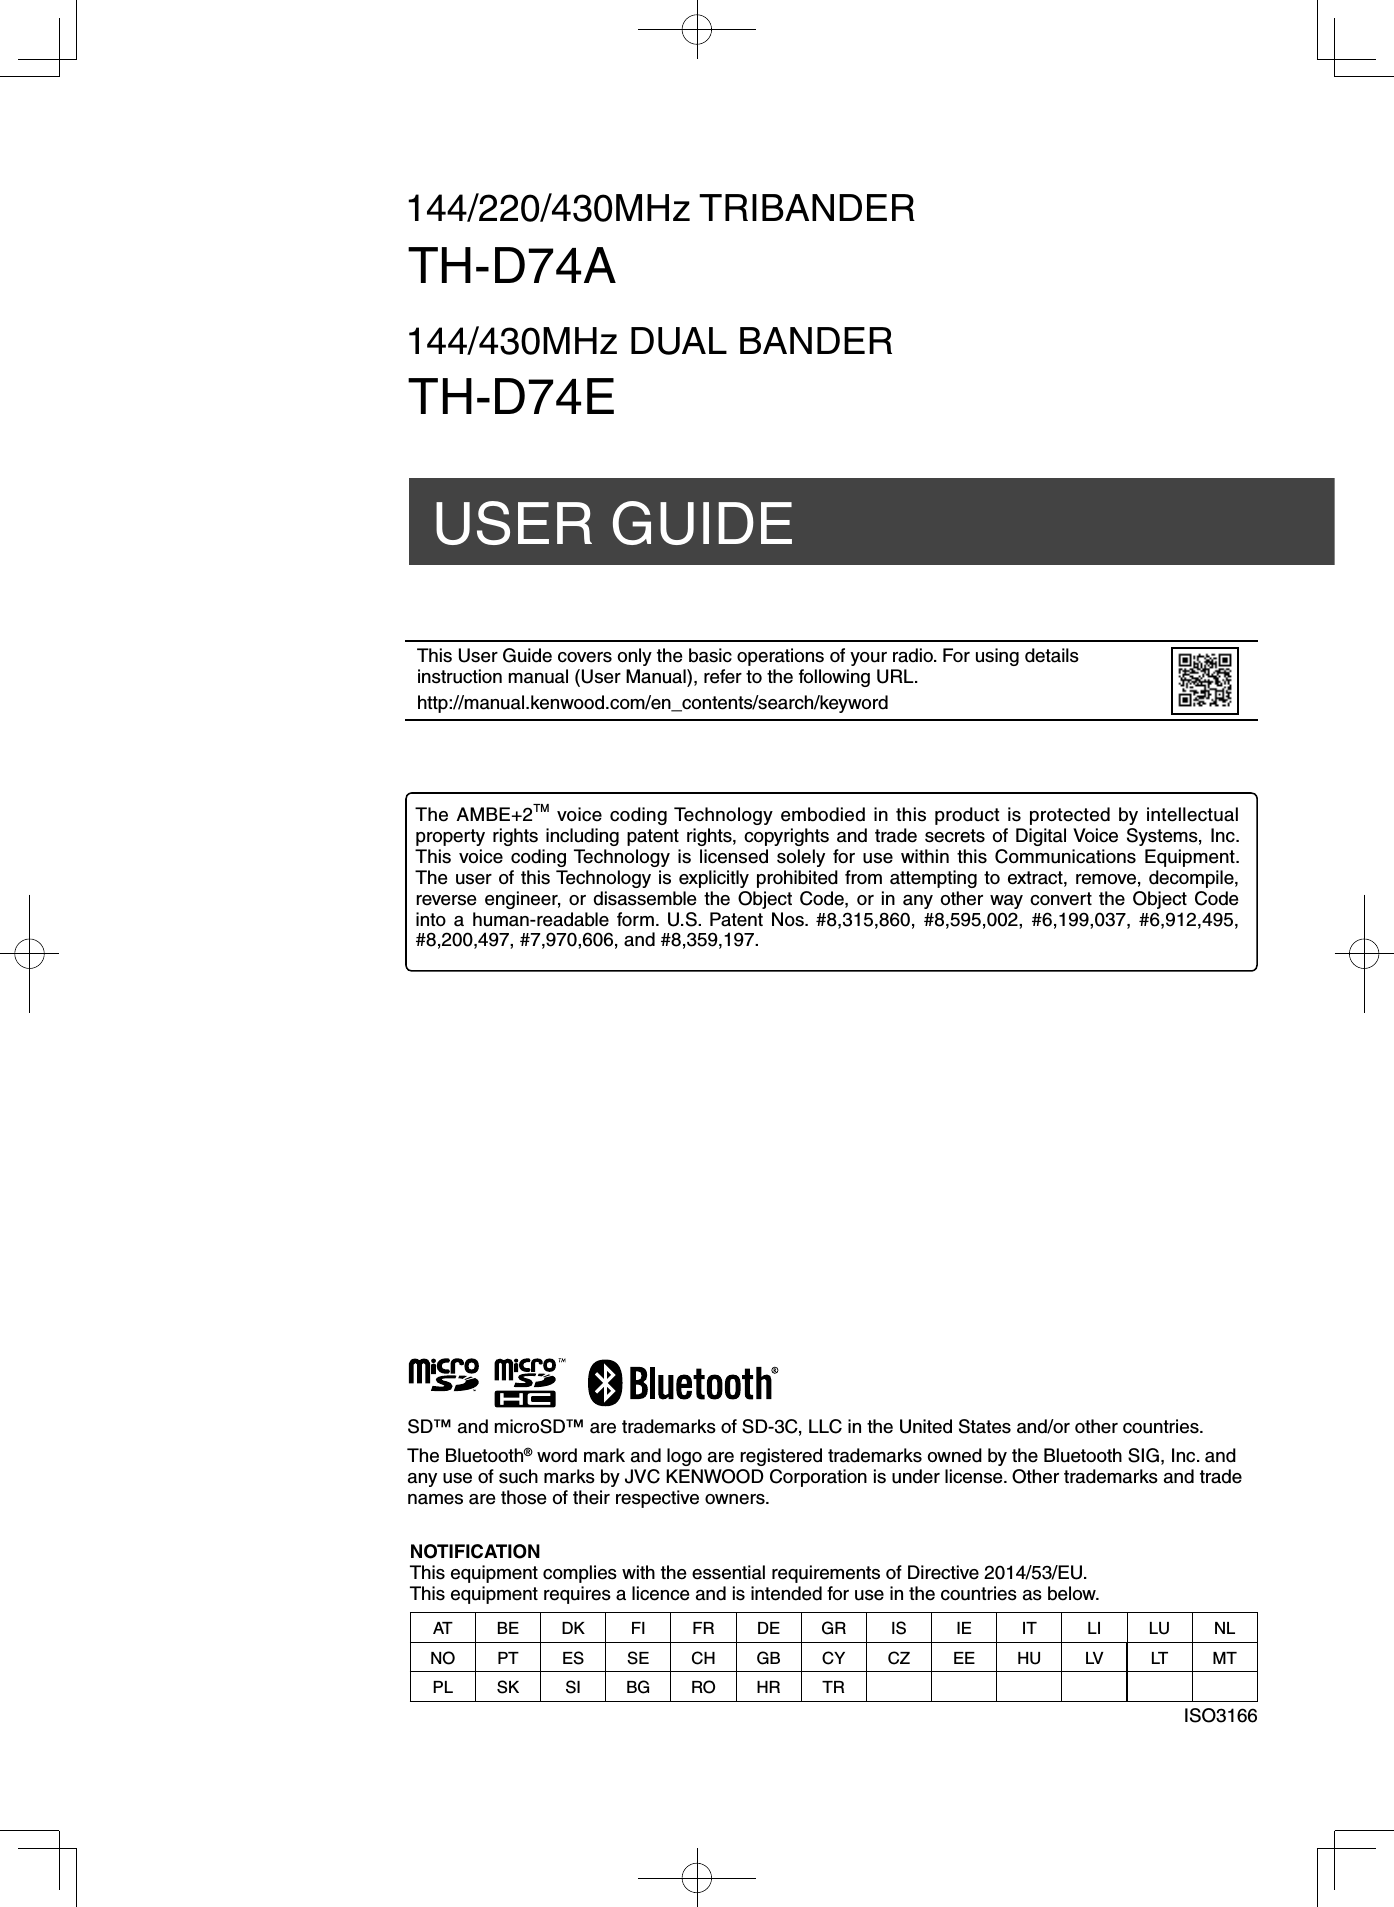 144/220/430MHz TRIBANDERUSER GUIDETH-D74A144/430MHz DUAL BANDERTH-D74ESD™ and microSD™ are trademarks of SD-3C, LLC in the United States and/or other countries.The Bluetooth® word mark and logo are registered trademarks owned by the Bluetooth SIG, Inc. and any use of such marks by JVC KENWOOD Corporation is under license. Other trademarks and trade names are those of their respective owners.This User Guide covers only the basic operations of your radio. For using details instruction manual (User Manual), refer to the following URL.http://manual.kenwood.com/en_contents/search/keywordNOTIFICATIONThis equipment complies with the essential requirements of Directive 2014/53/EU.This equipment requires a licence and is intended for use in the countries as below.AT BE DK FI FR DE GR IS IE IT LI LU NLNO PT ES SE CH GB CY CZ EE HU LV LT MTPL SK SI BG RO HR TRISO3166The AMBE+2TM voice coding Technology embodied in this product is protected by intellectual property rights including patent rights, copyrights and trade secrets of Digital Voice Systems, Inc.  This voice coding Technology is licensed solely for use within this Communications Equipment.  The user of this Technology is explicitly prohibited from attempting to extract, remove, decompile, reverse engineer, or disassemble the Object Code, or in any other way convert the Object Code into a human-readable form. U.S. Patent Nos. #8,315,860, #8,595,002, #6,199,037, #6,912,495, #8,200,497, #7,970,606, and #8,359,197.